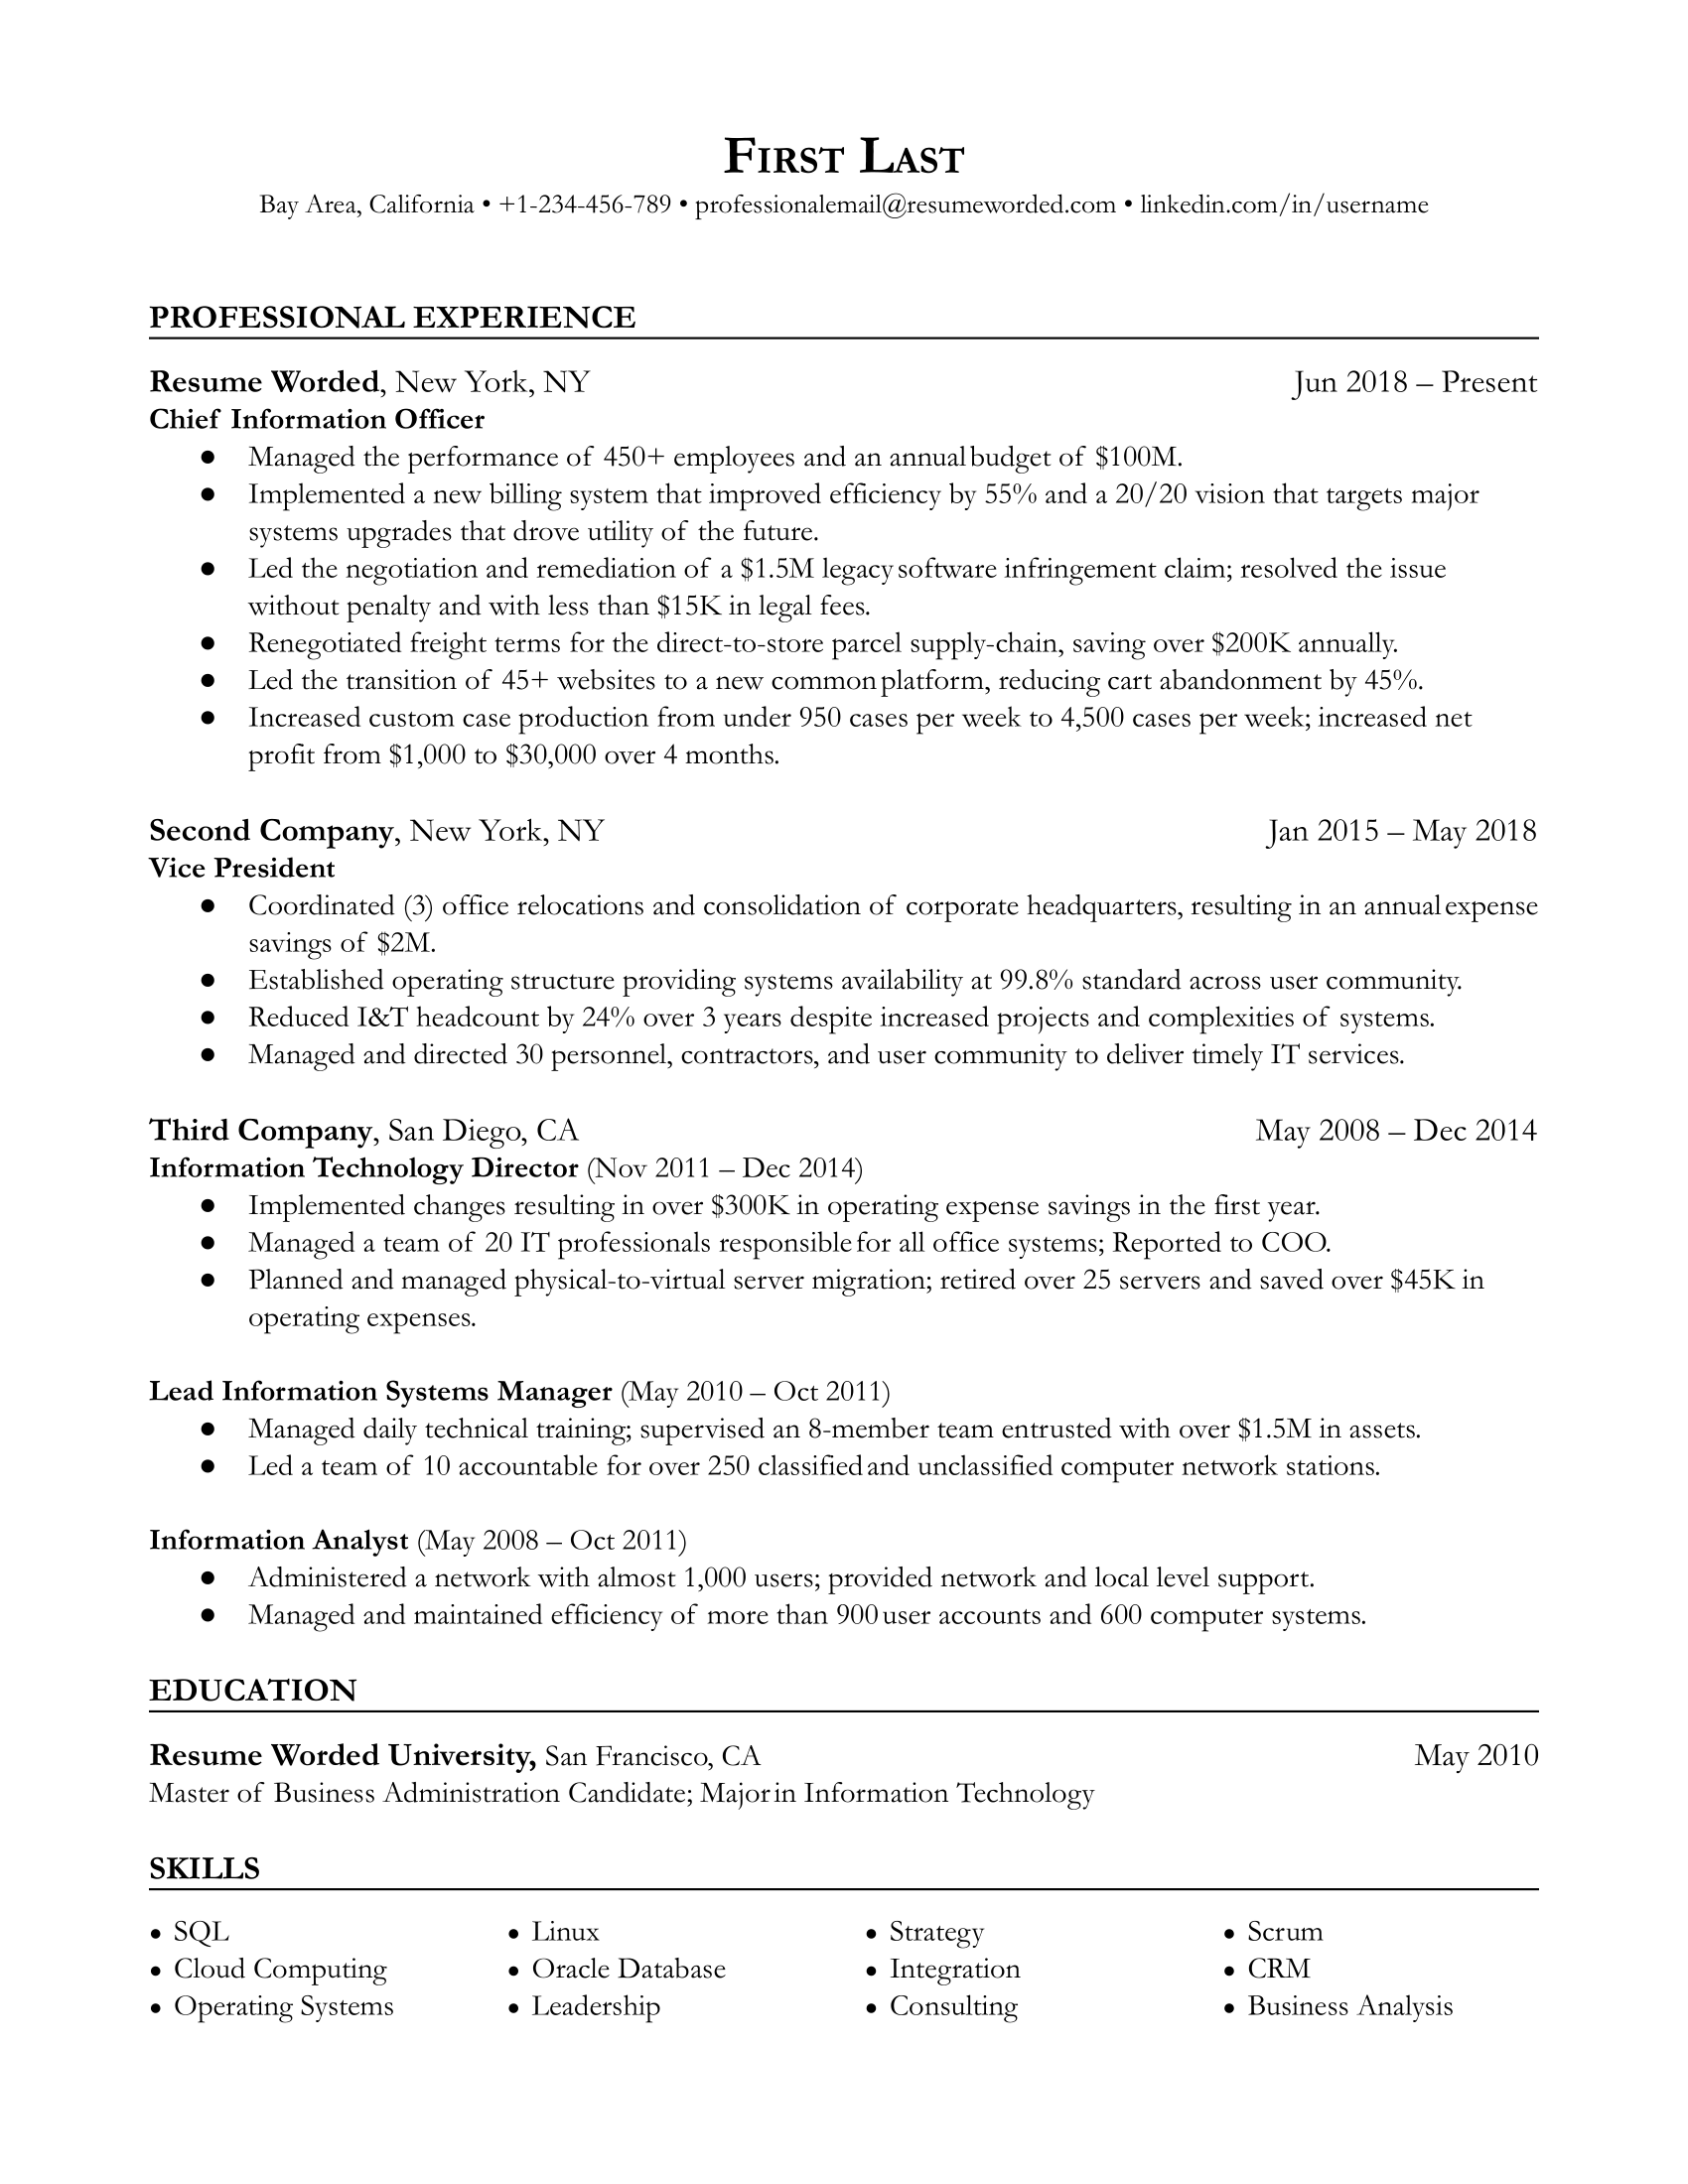 Chief Information Officer resume template example using bullet points to demonstrate soft skills and provide additional context for accomplishments